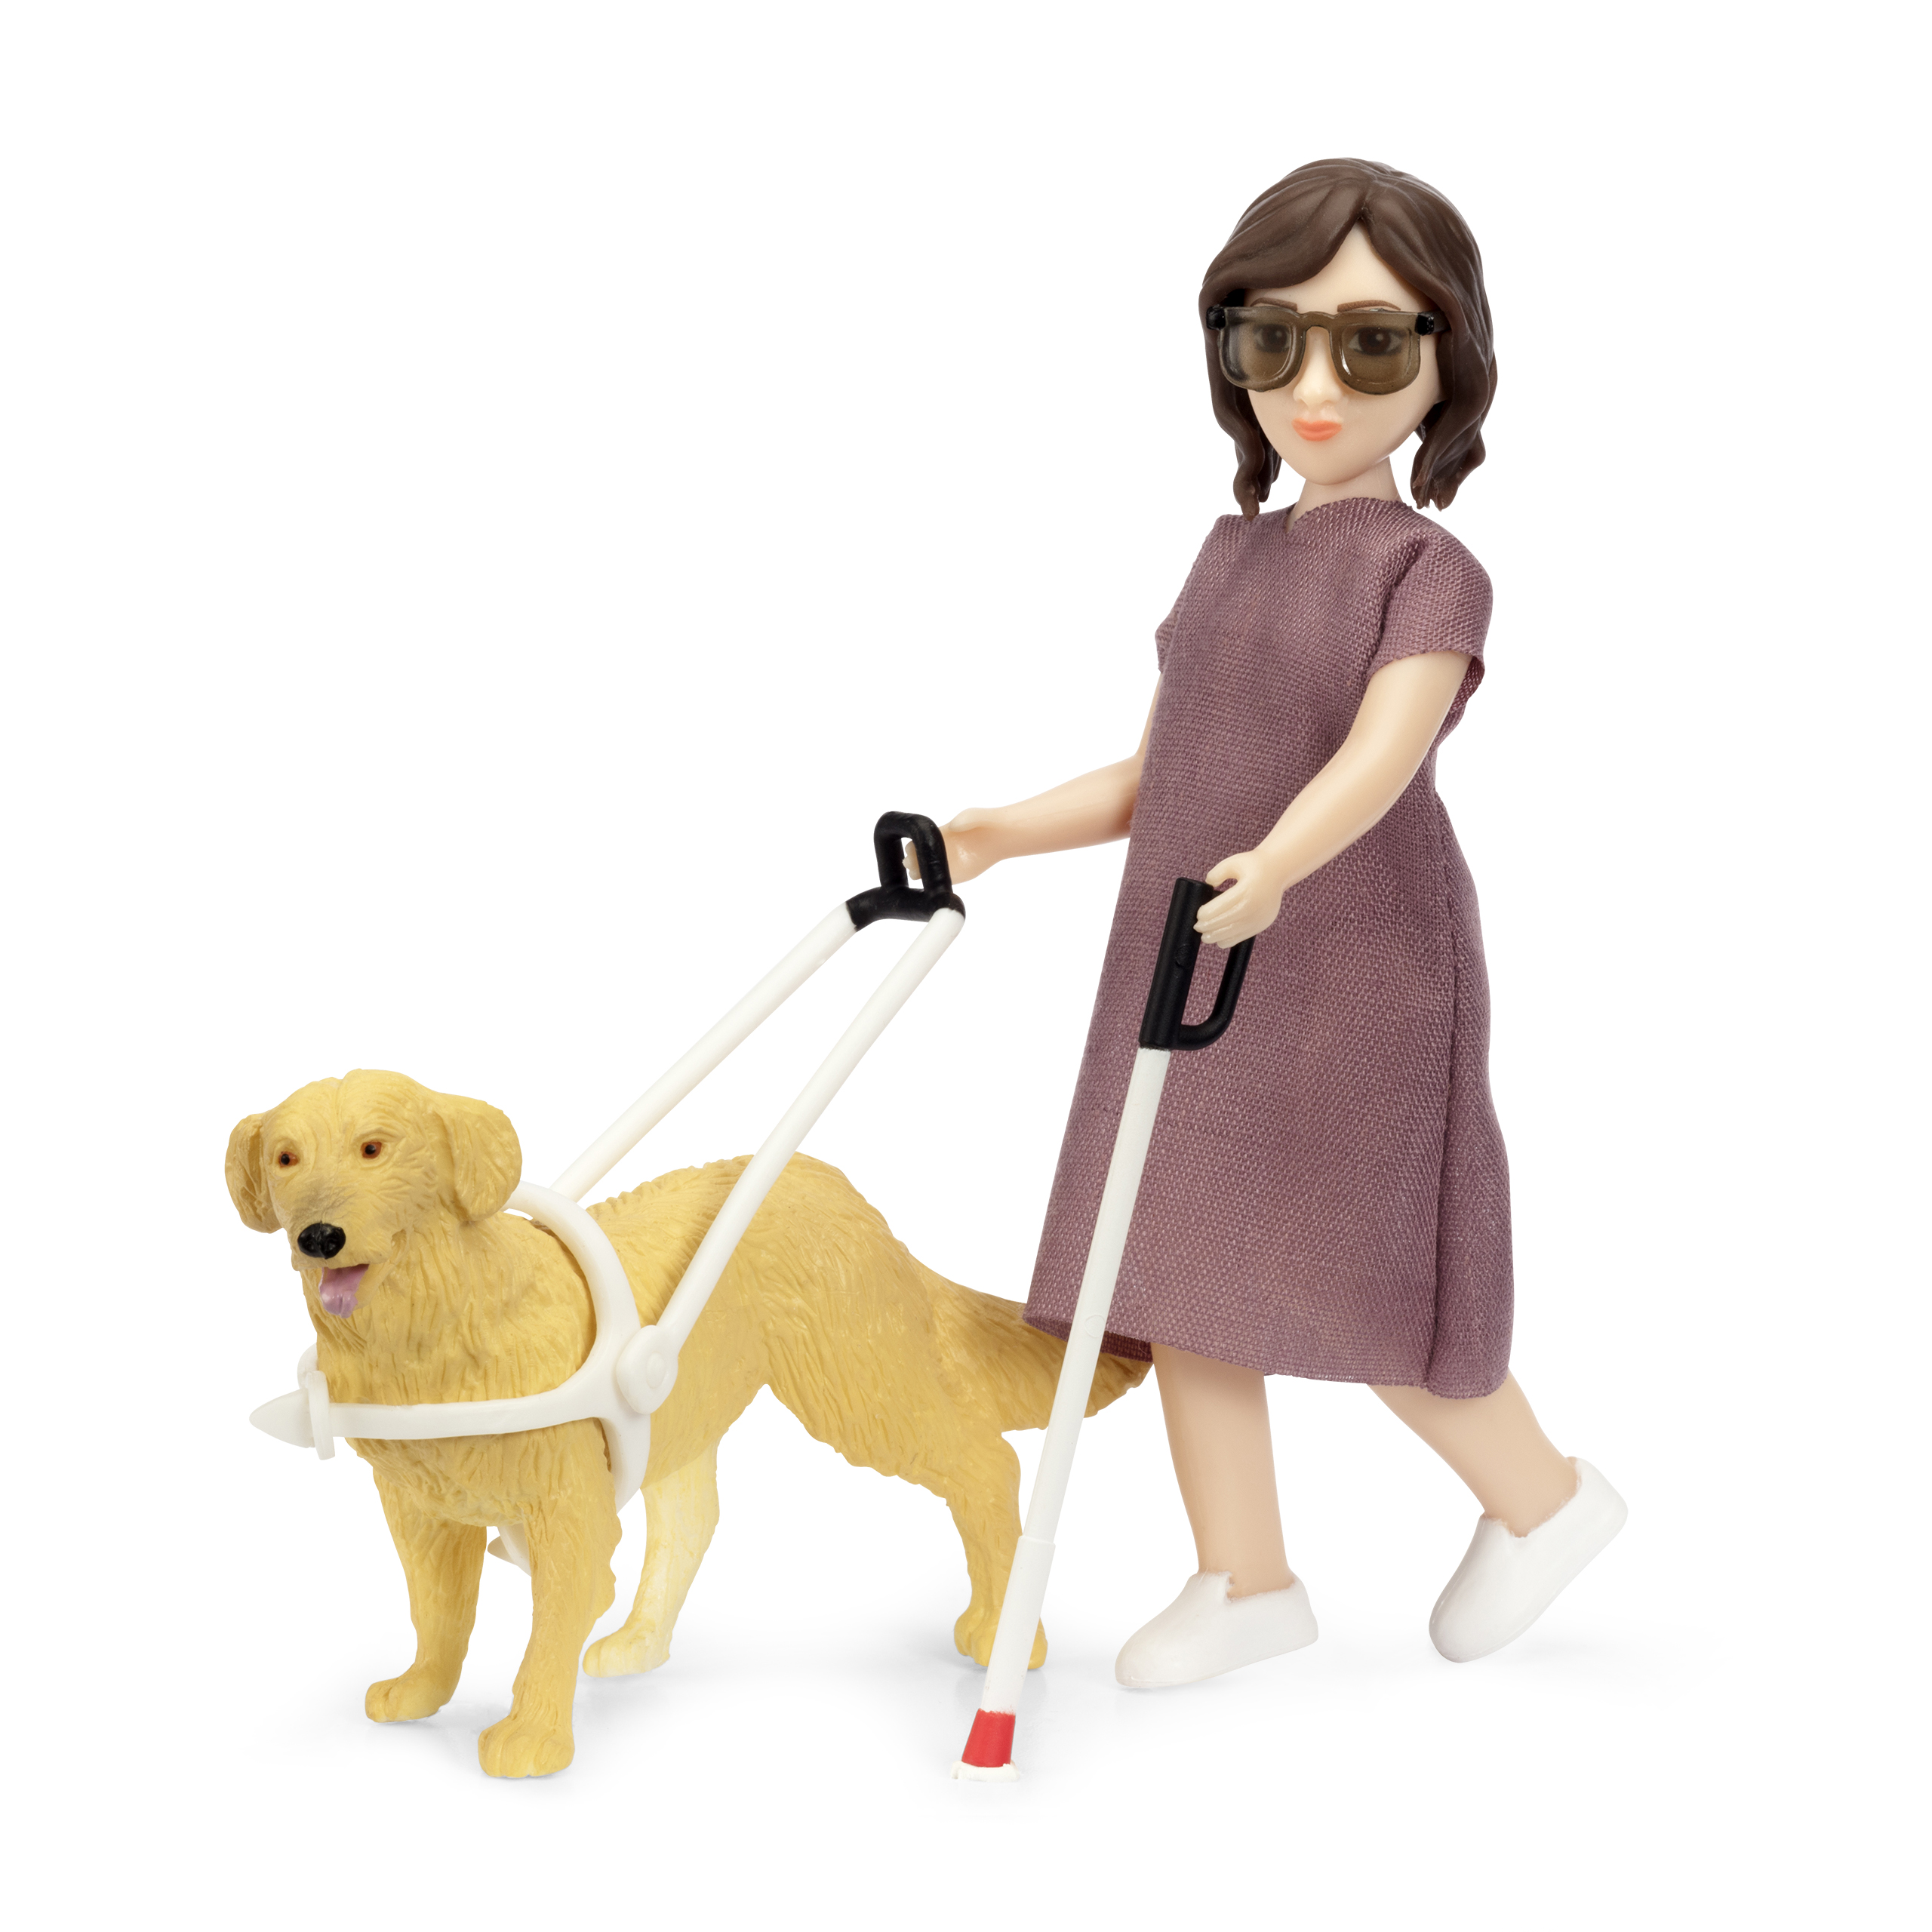 Lundby lundby	doll house dolls with cane and guide dog